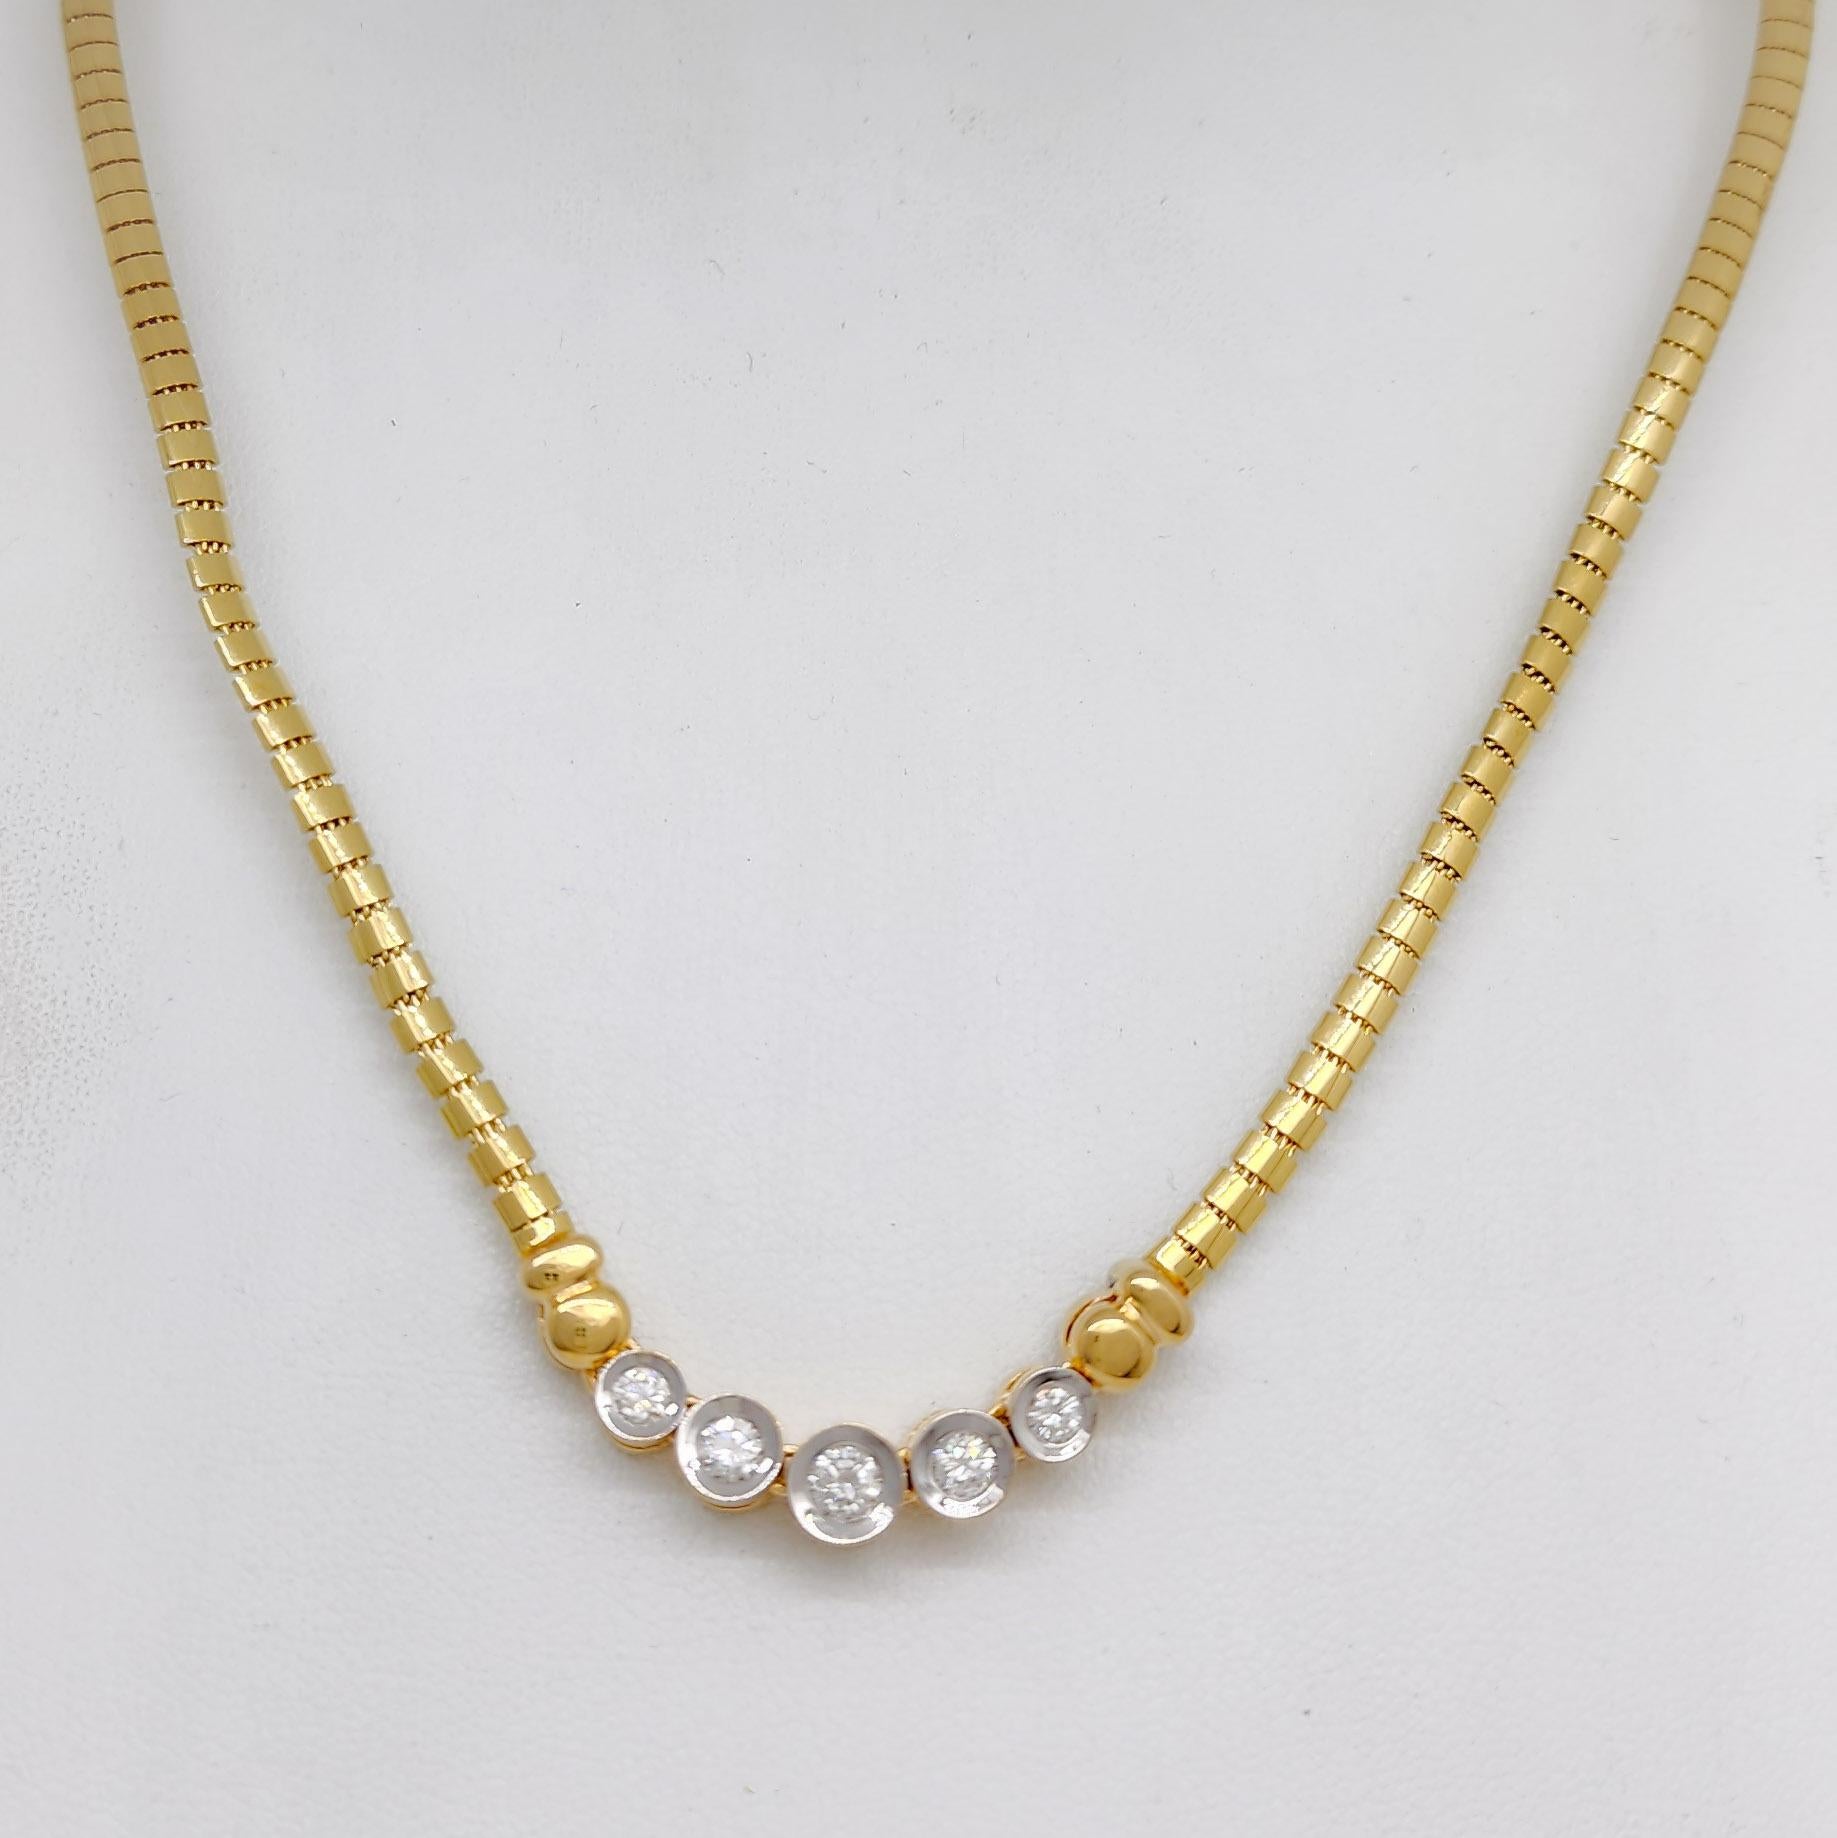 Beautiful 0.60 ct. white diamond rounds.  Handmade necklace with omega snake chain in 14k yellow gold.  Length is 18